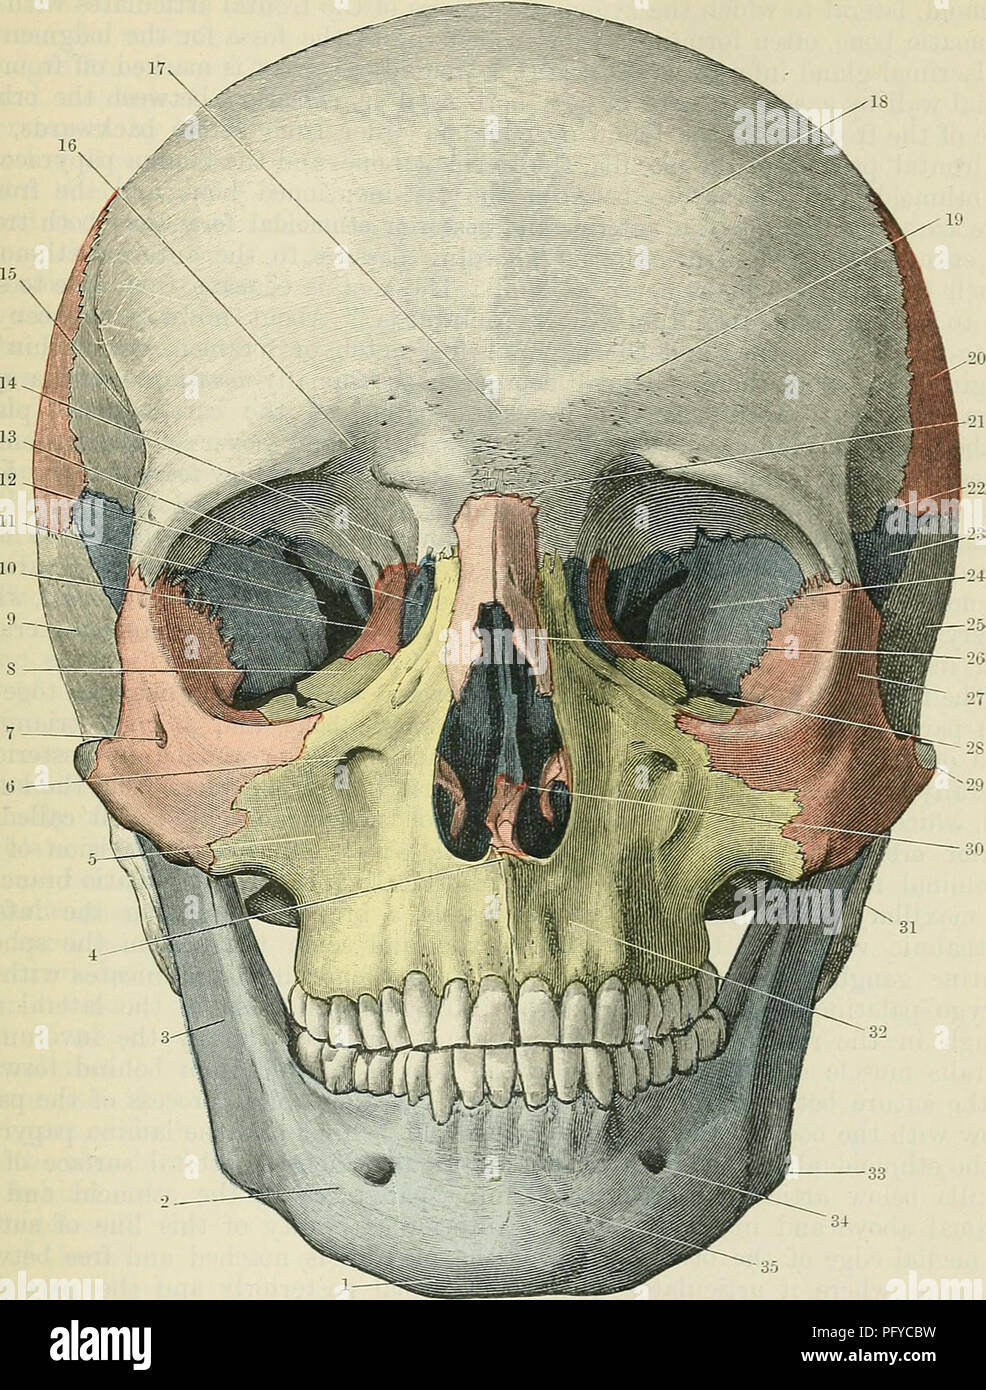 . Cunningham's Text-book of anatomy. Anatomy. THE FKONT OF THE SKULL. 161 this surface is separated from the lateral wall by the superior orbital fissure. Fig. 168.—The Front of the Skull. The uasal bones, lamina papyracea of the ethmoid, vomer, inferior concha?, zygomatic, and parietal bones are coloured red. The sphenoid, lacrimal, perpendicular part and middle concbae of the ethmoid, and inferior conchse are coloured blue. The maxillae are coloured yellow. The frontal and temporal bones are left uncoloured. 1. Mental protuberance. 14 2. Body of mandible. 15 3. Ramus of mandible. 16 4. Anter Stock Photo